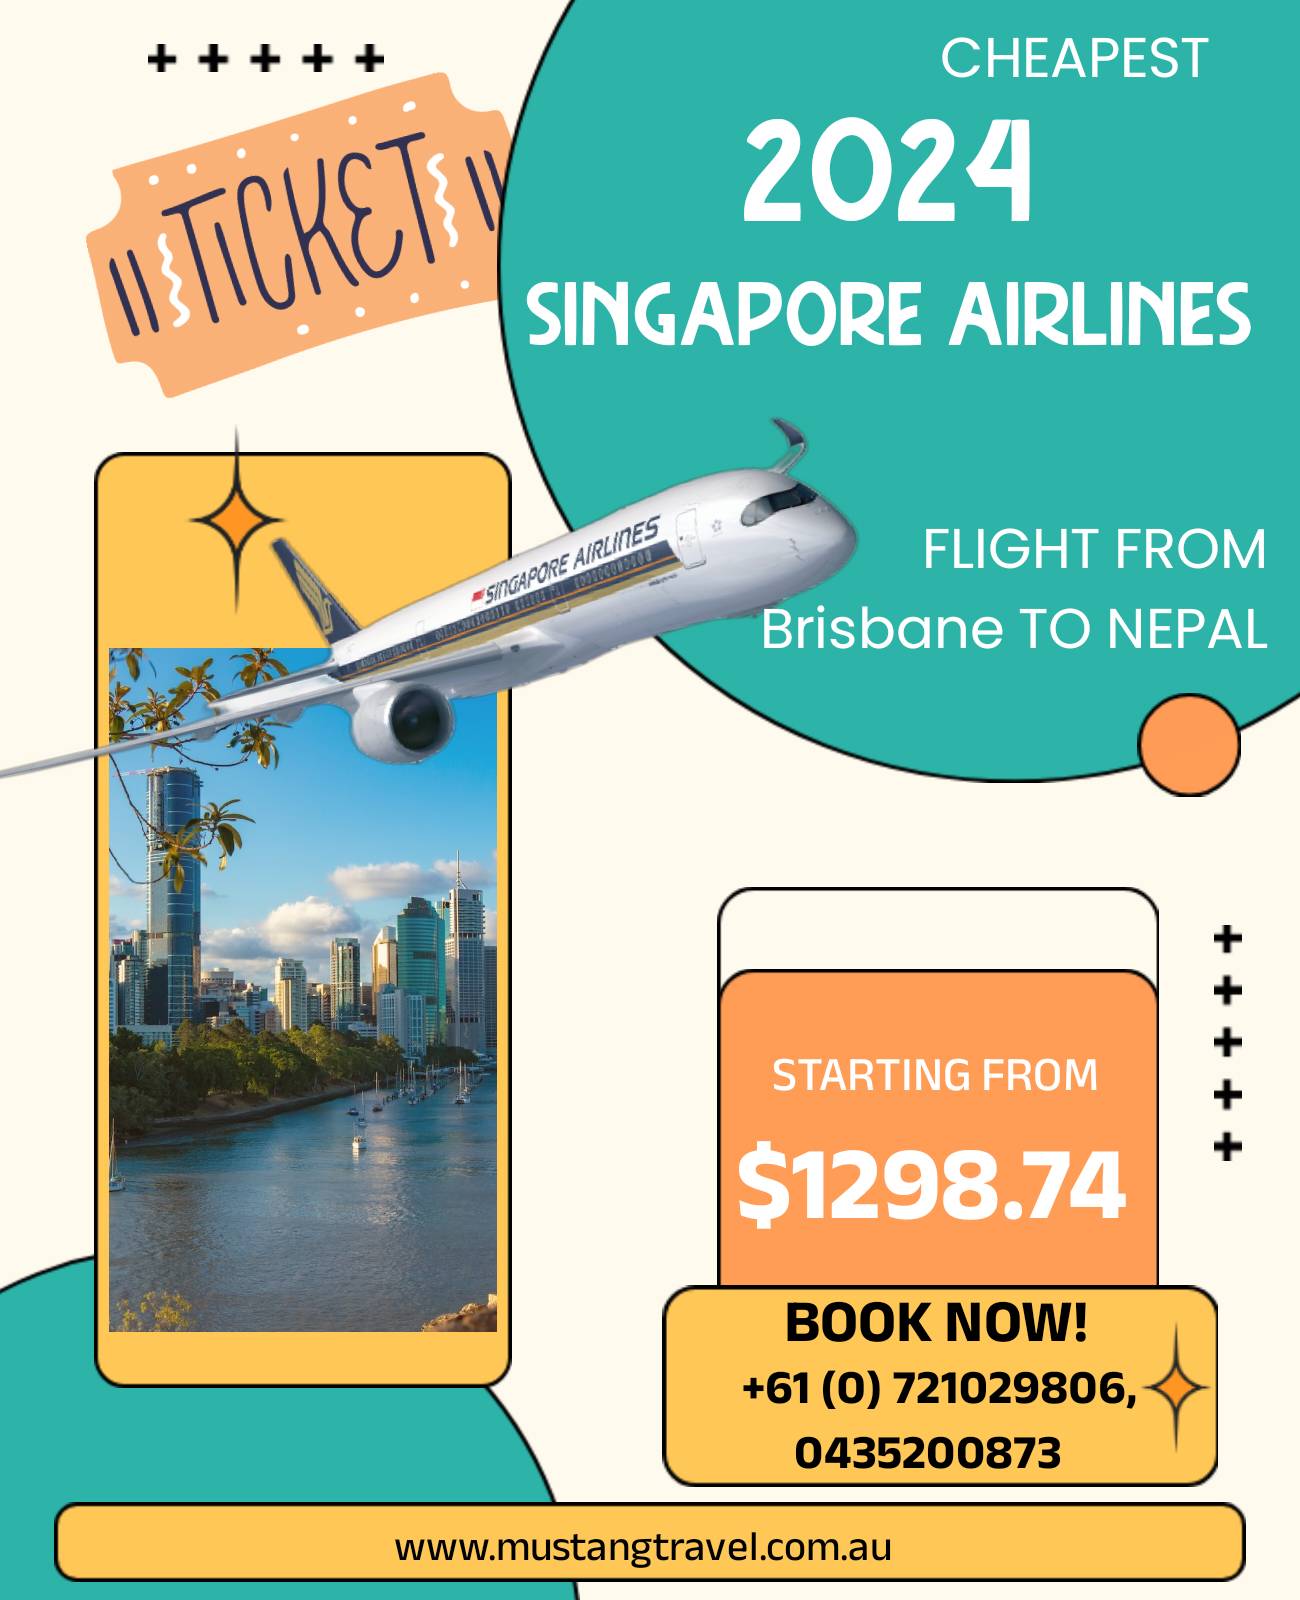 Cheapest Singapore Airlines FLight for 2024